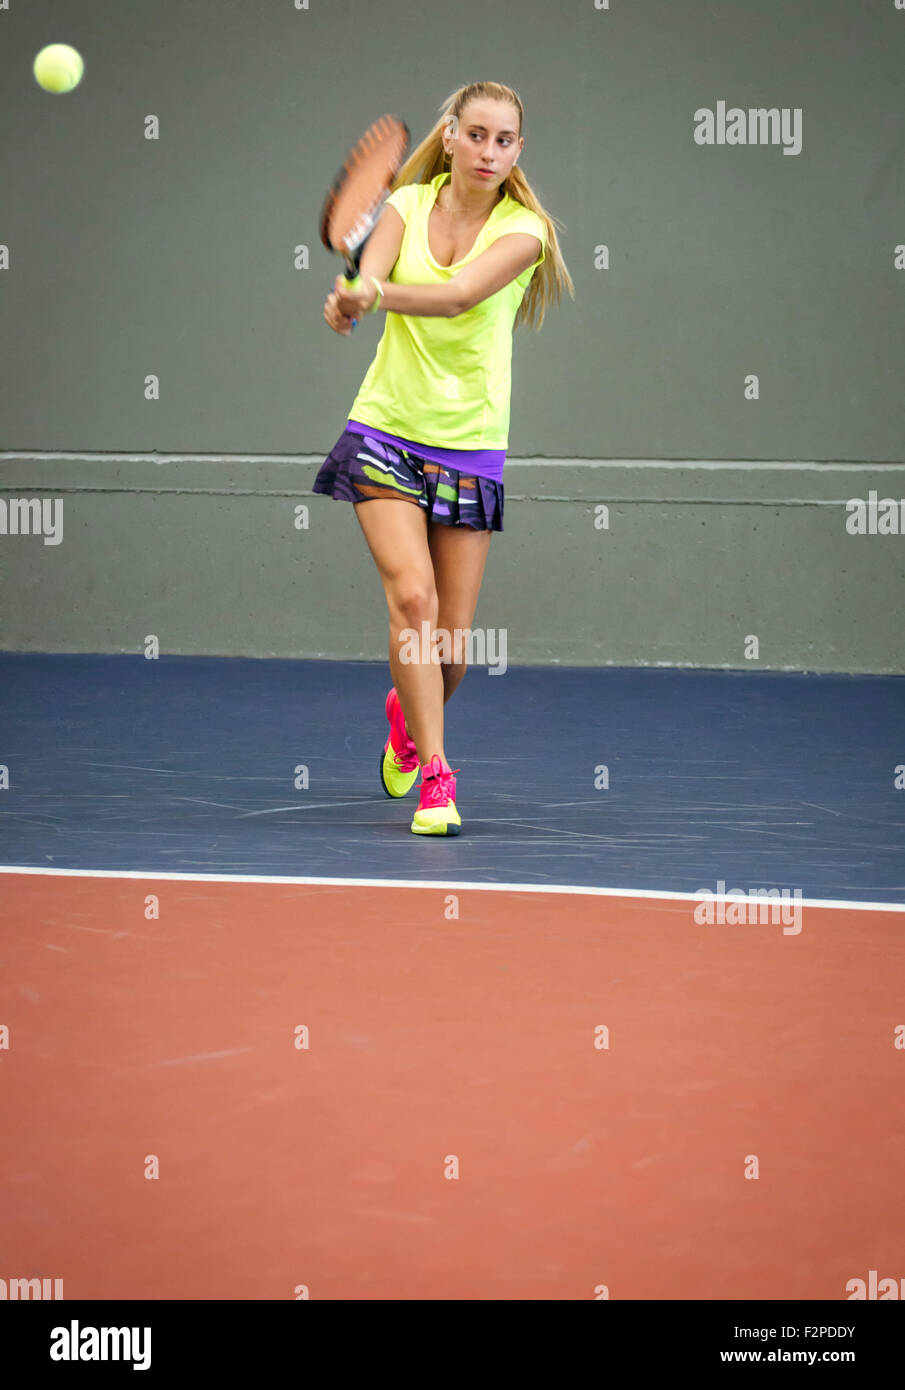 Young woman playing tennis in an indoor tennis center Stock Photo